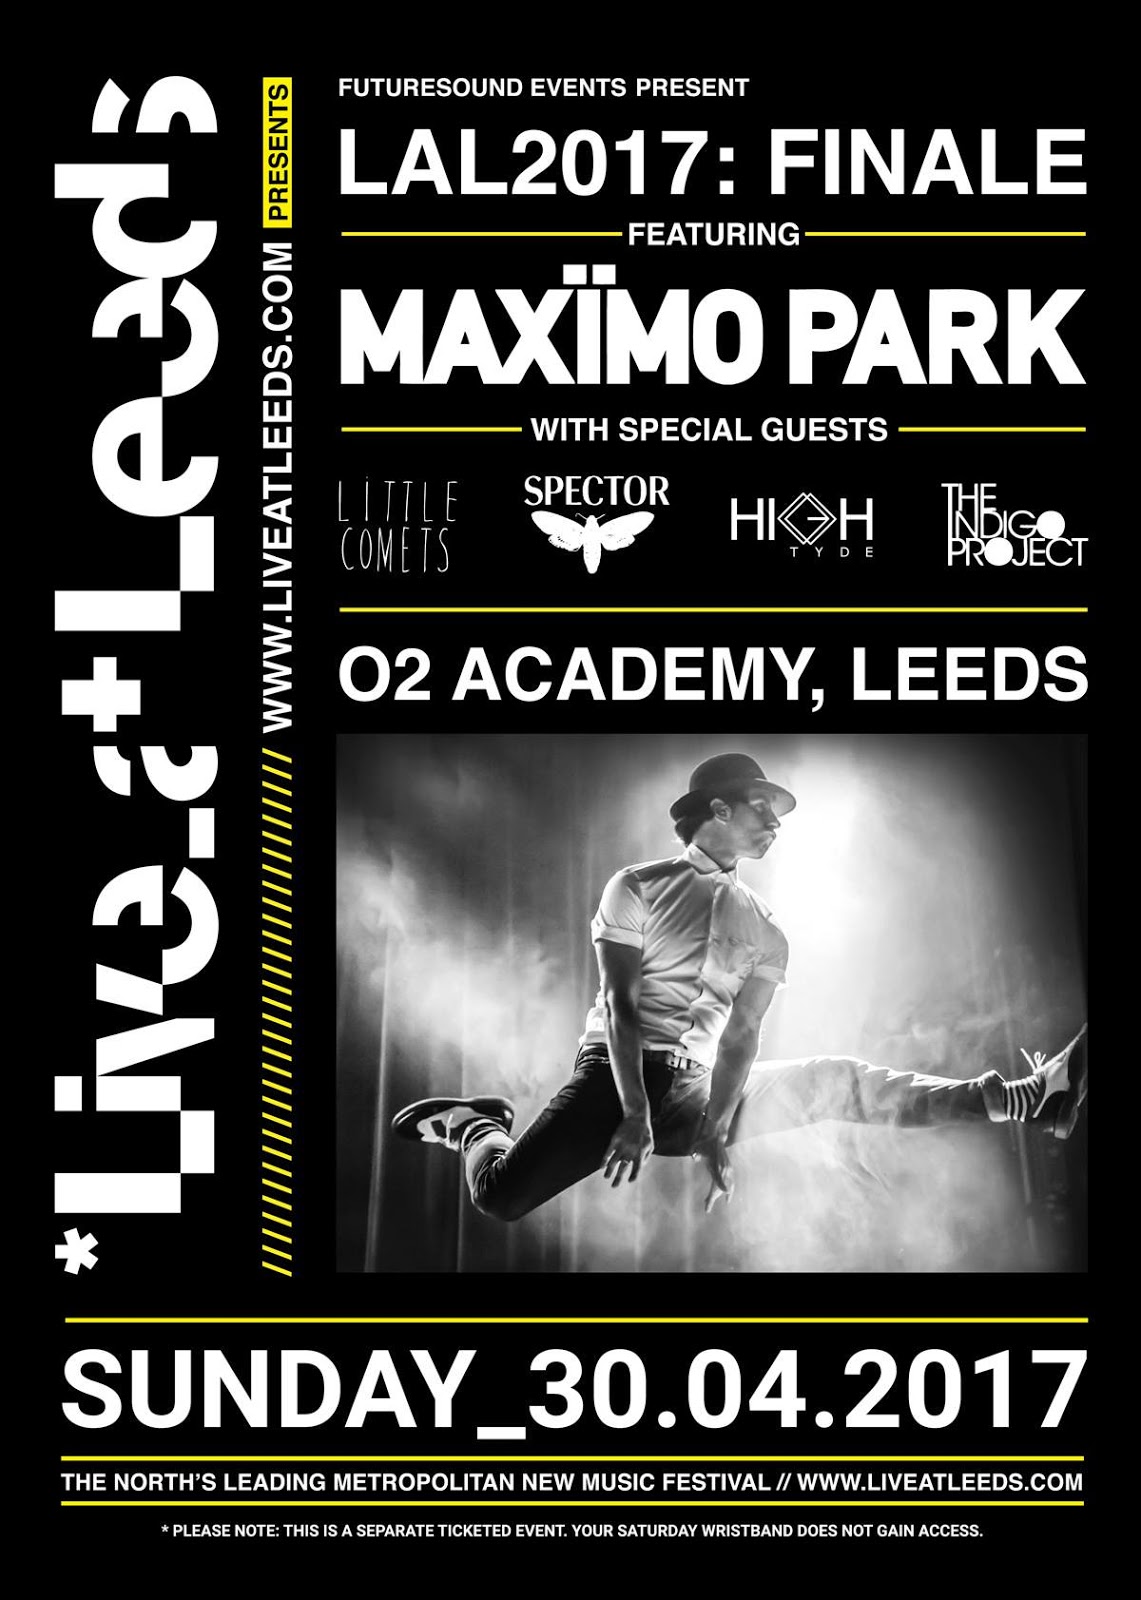 Maximo Park to headline the Live At Leeds